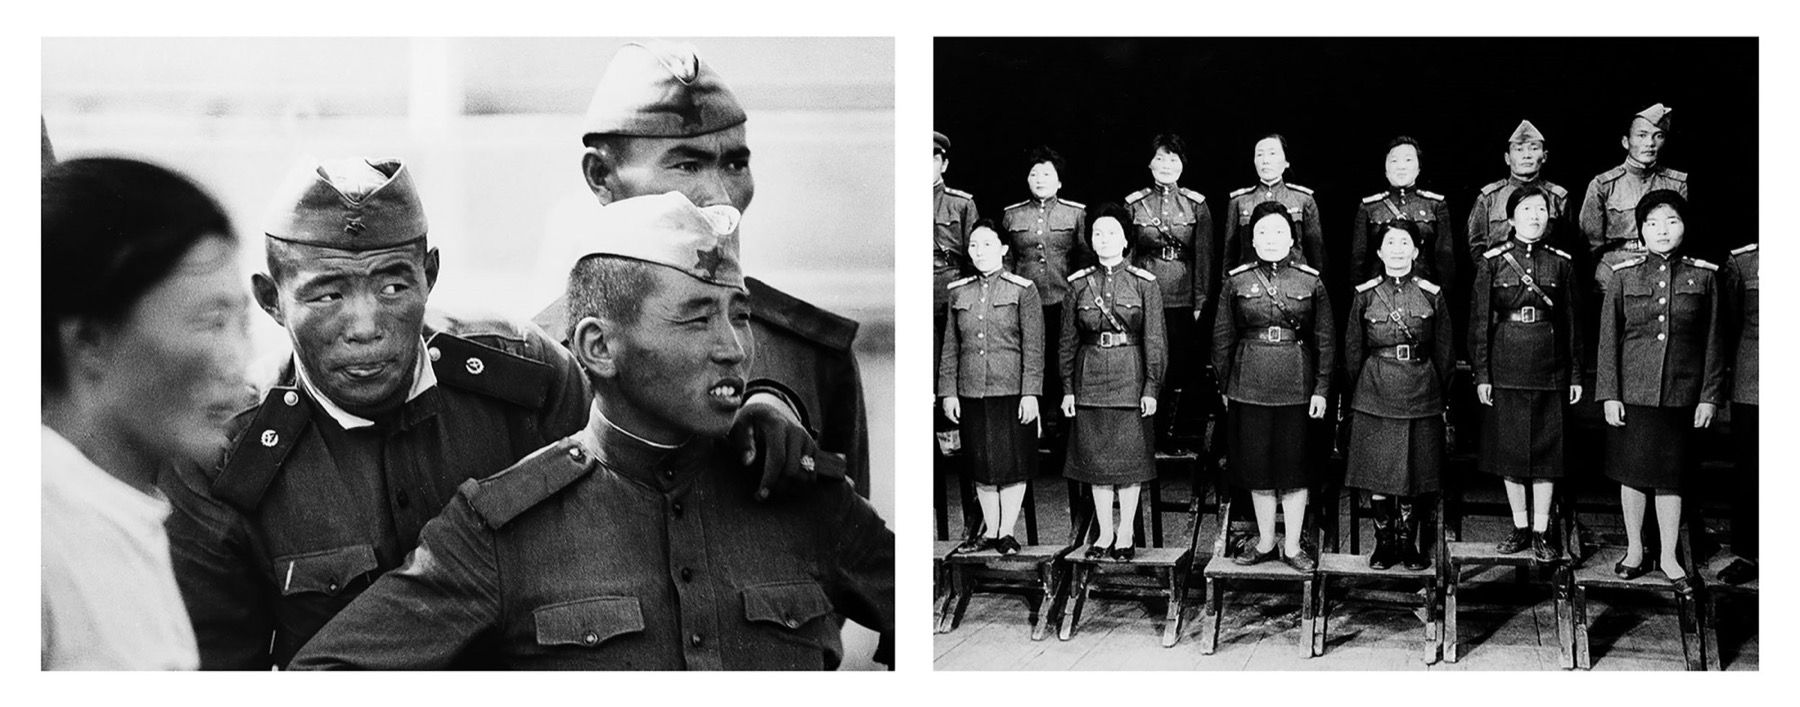 Caio Mario Garrubba Mongolian Army, Choir and Armed Forces, years 1960

Two vint&hellip;